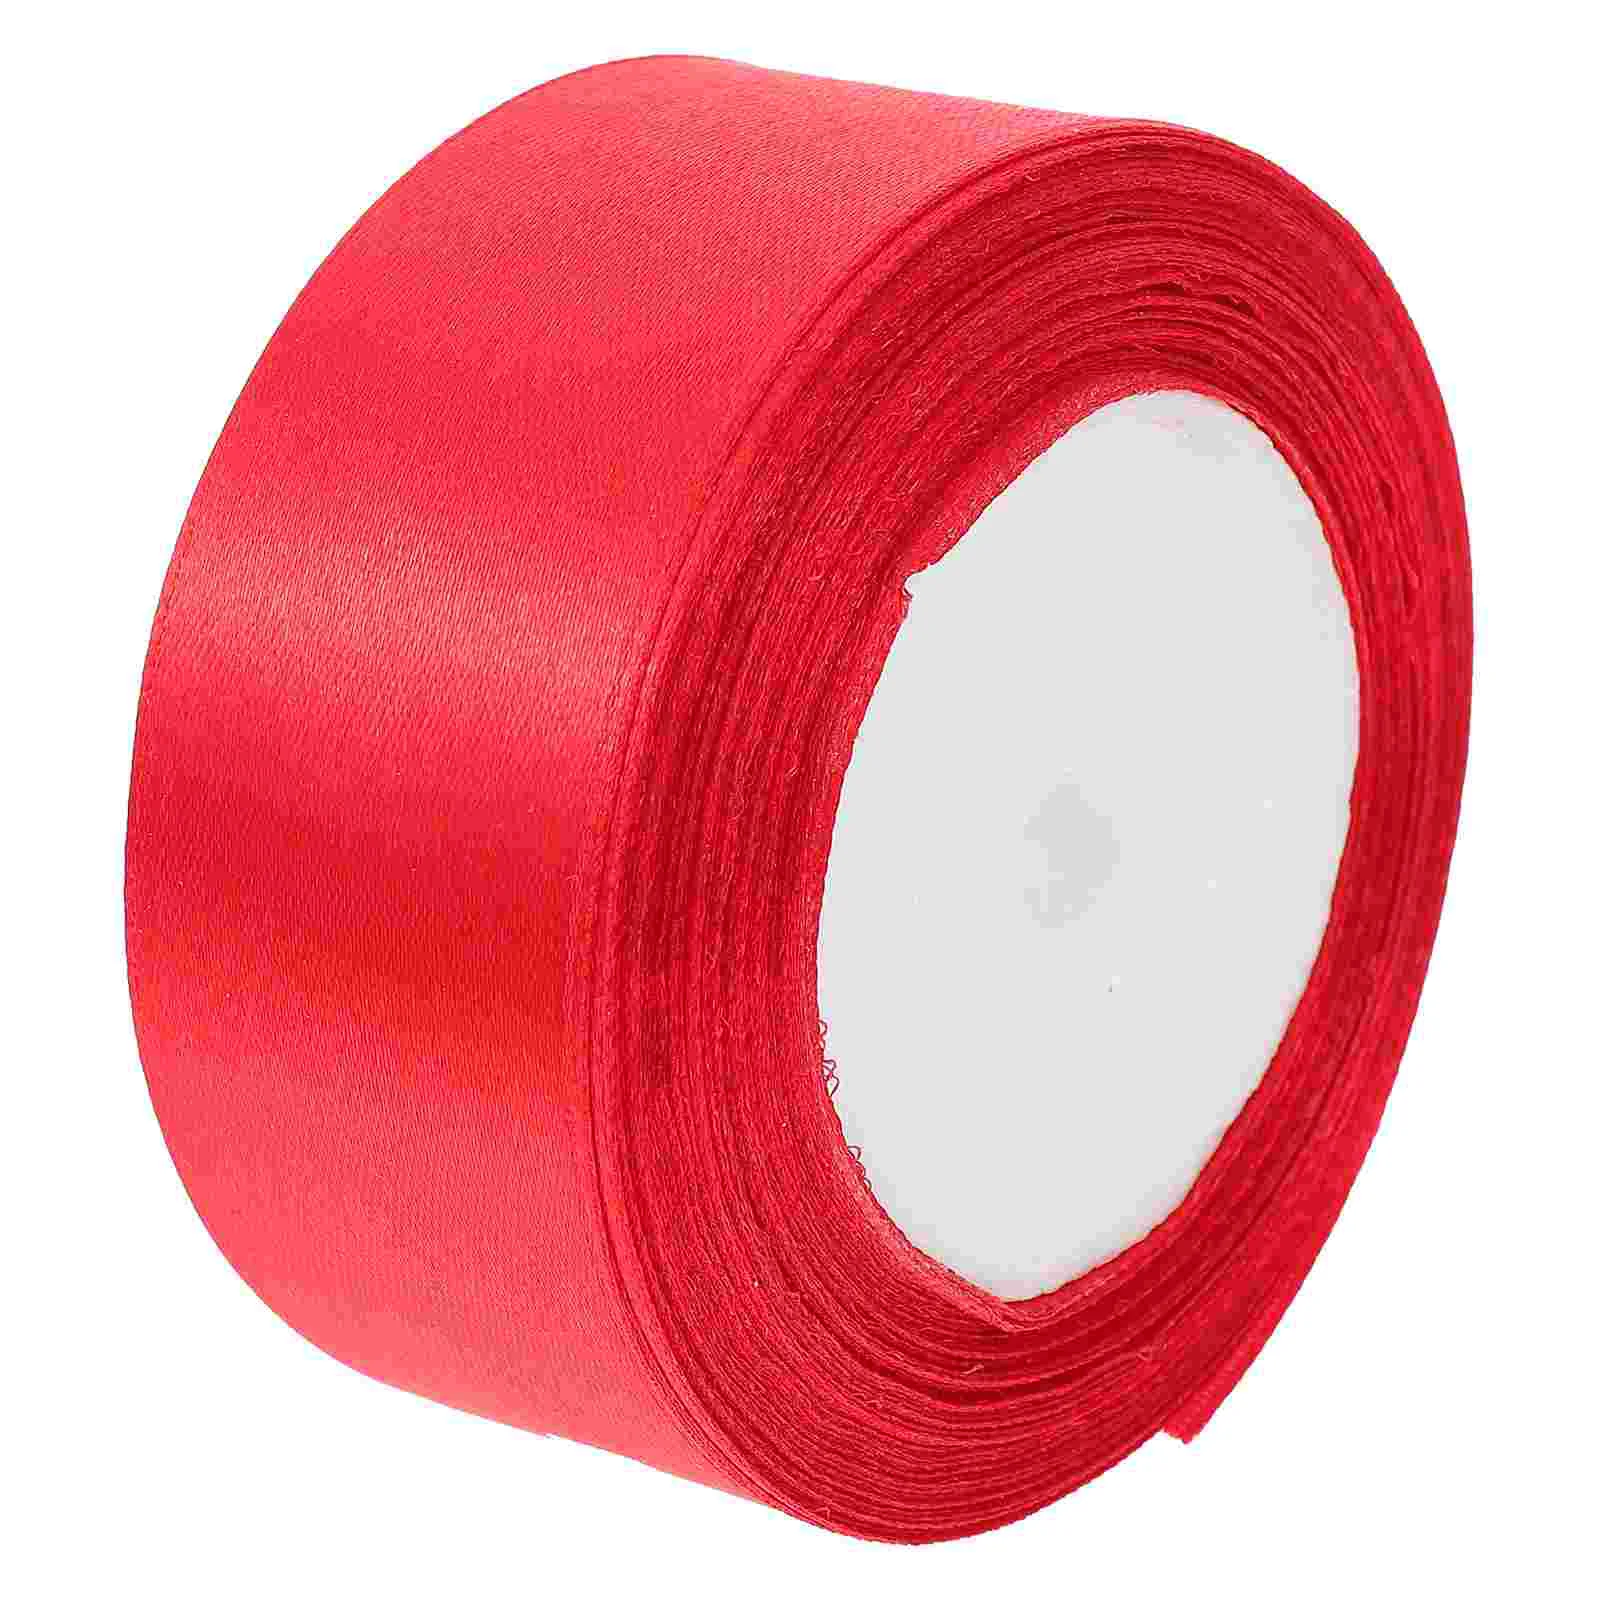 

Line Finish Finishing Athletics Nylon Rope Sprint Ribbon Red Grosgrain Sprinting Rushing Race Game Wire Smooth Run Victory Track